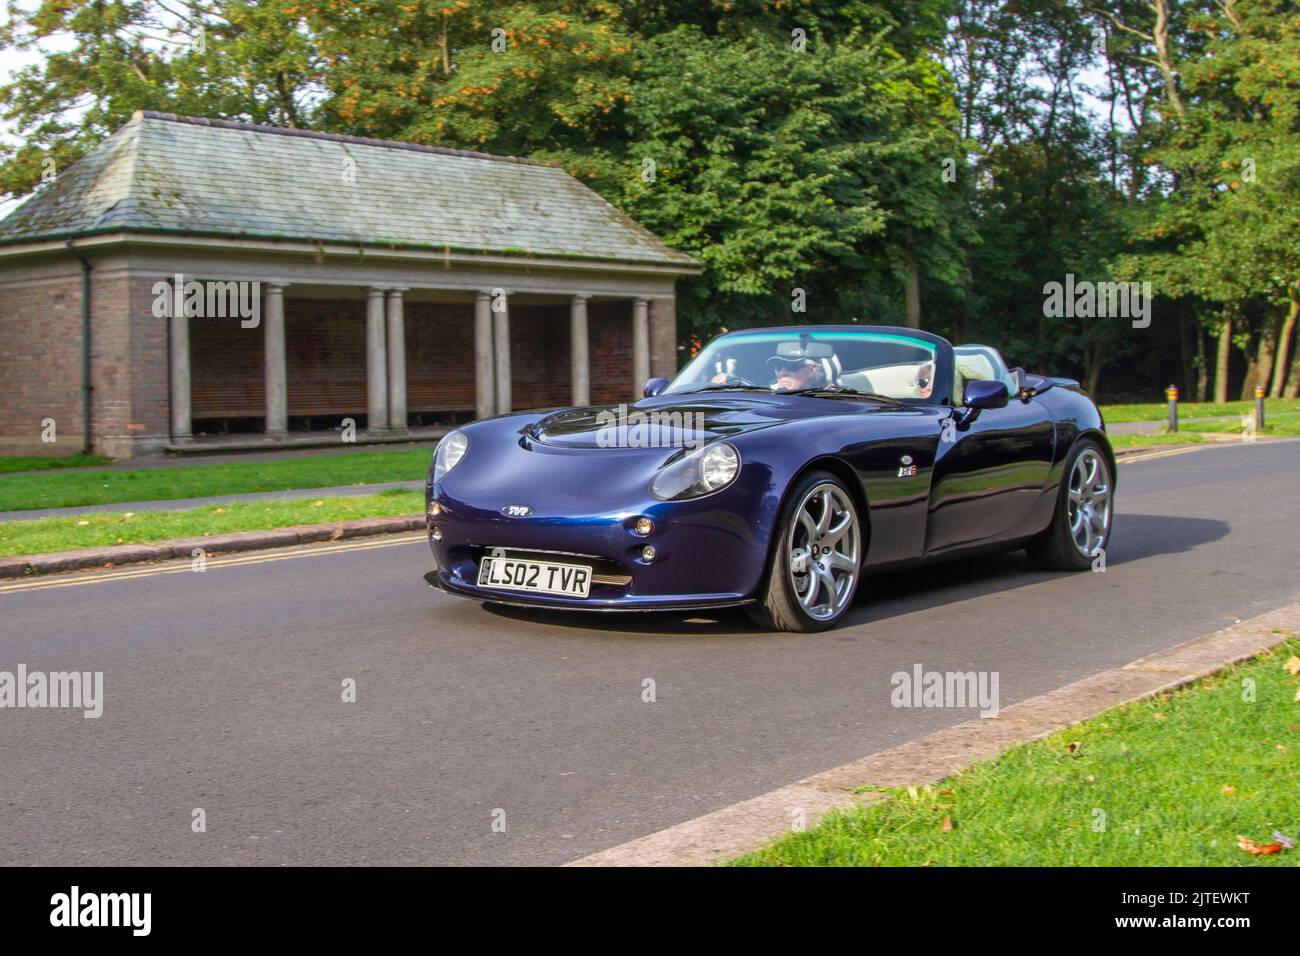 2002 Blue TAMORA BASE 5967cc petrol 5-speed manual, TVR Tamora V6 5MT; Cars arriving at the annual Stanley Park Classic Car Show. Stanley Park classics yesteryear Motor Show is hosted by Blackpool Vintage Vehicle Preservation Group, UK. Stock Photo